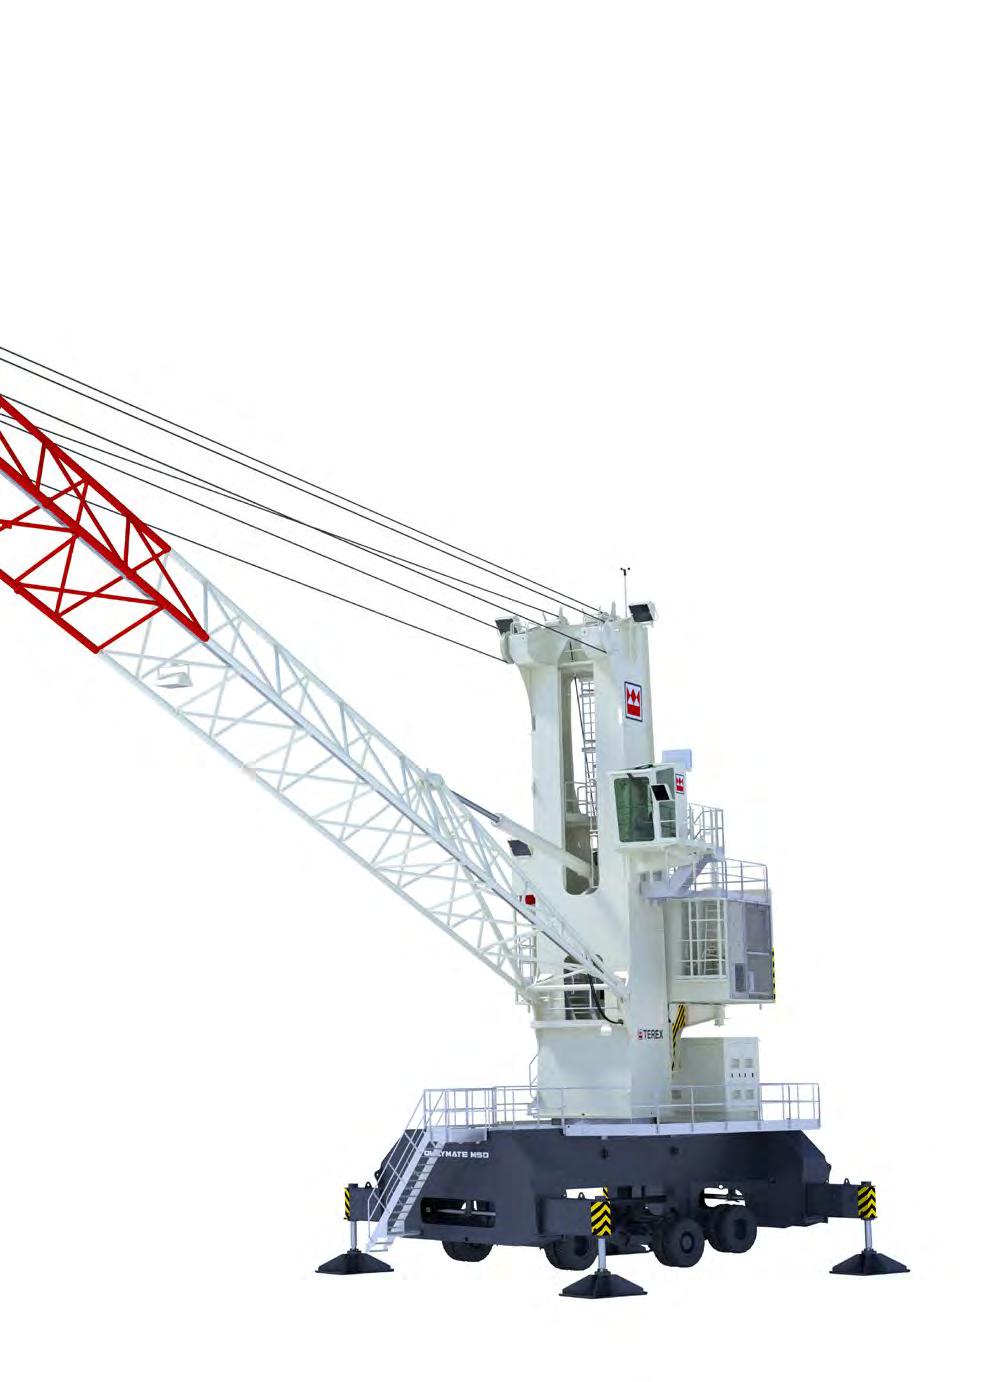 We have continuously developed our cranes over six decades, transforming them from a small universal crane to a large